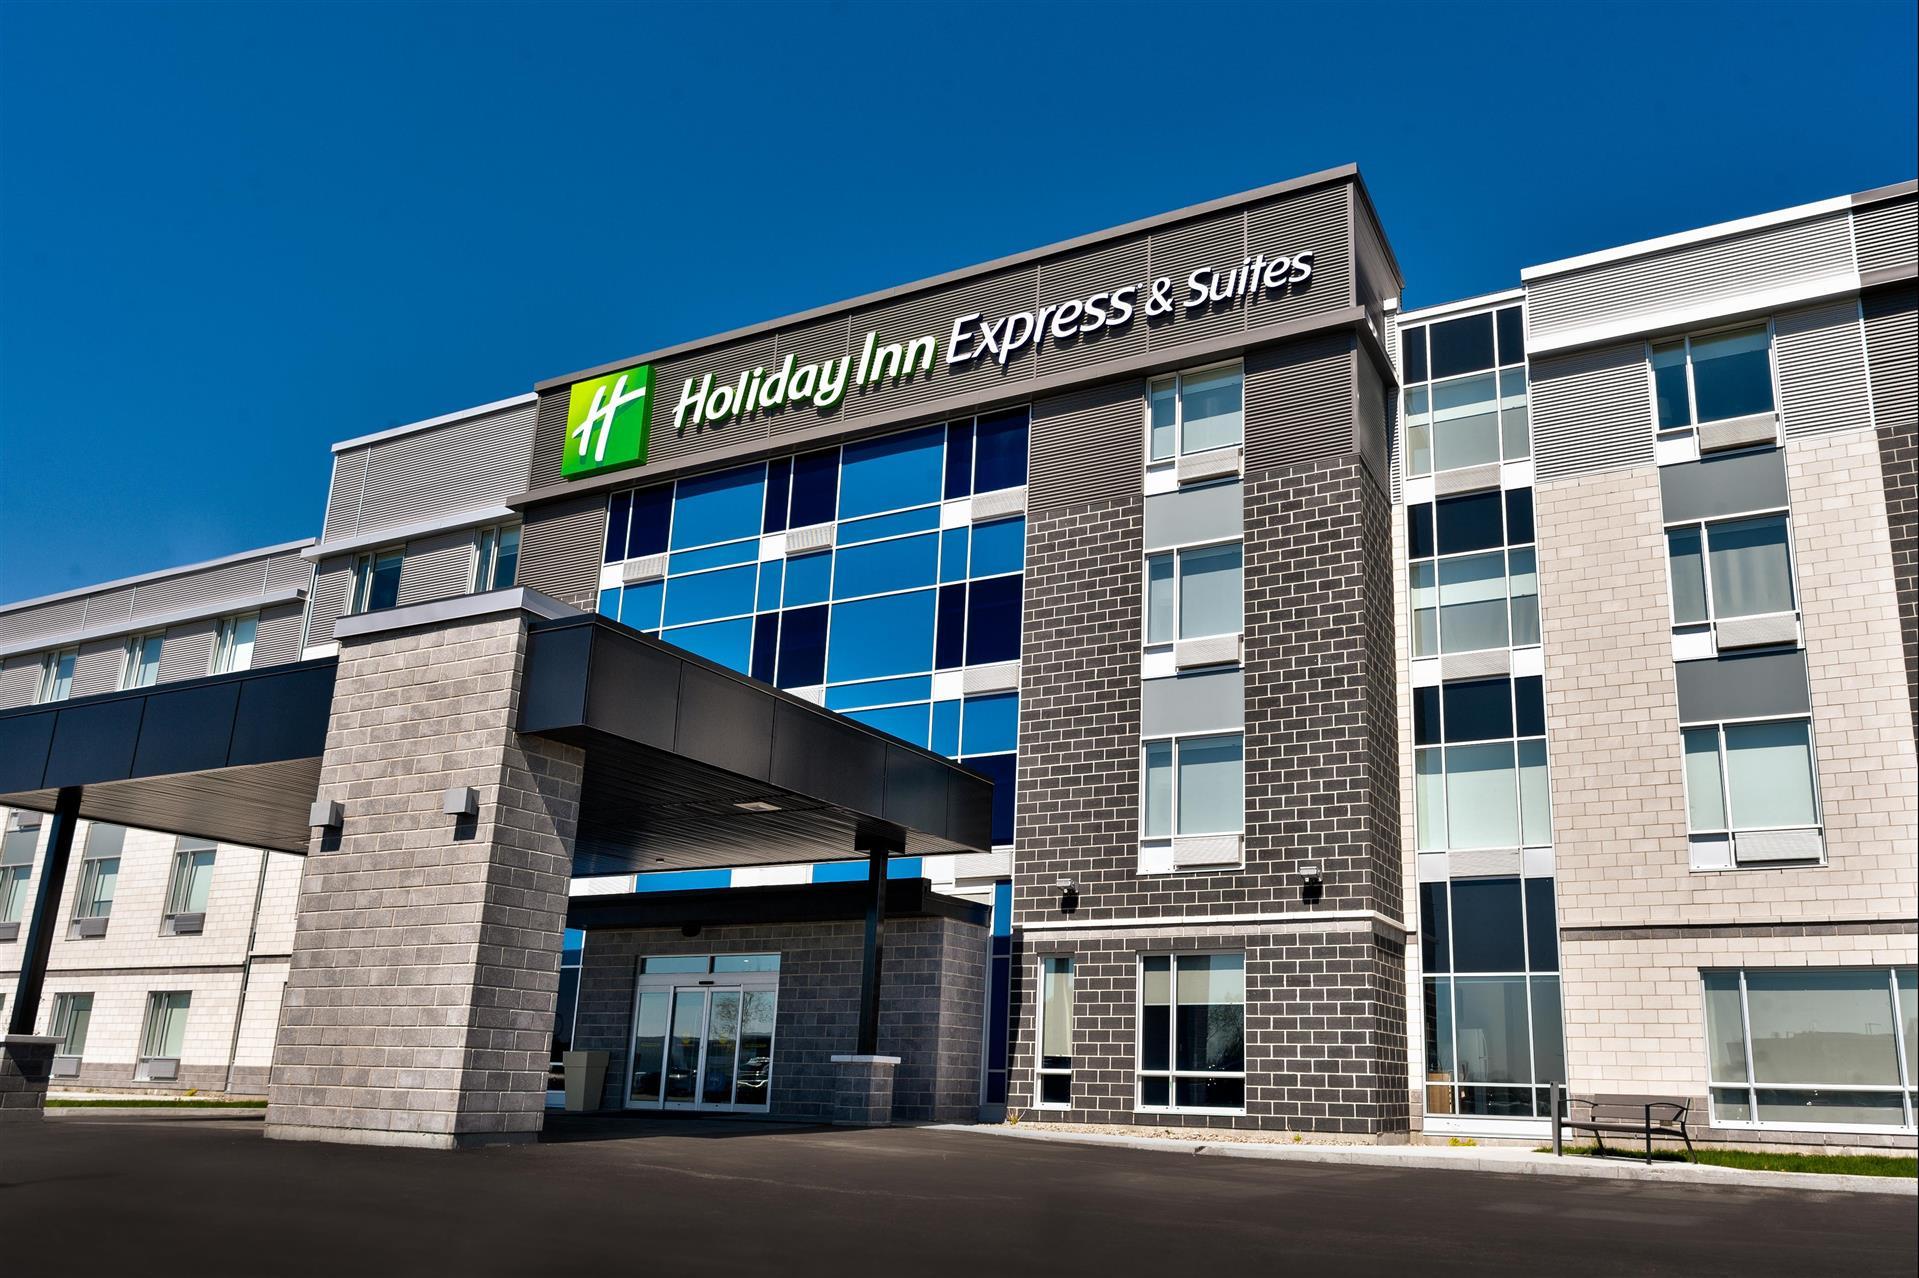 Holiday Inn Express & Suites Trois Rivieres Ouest in Trois-Rivieres, QC